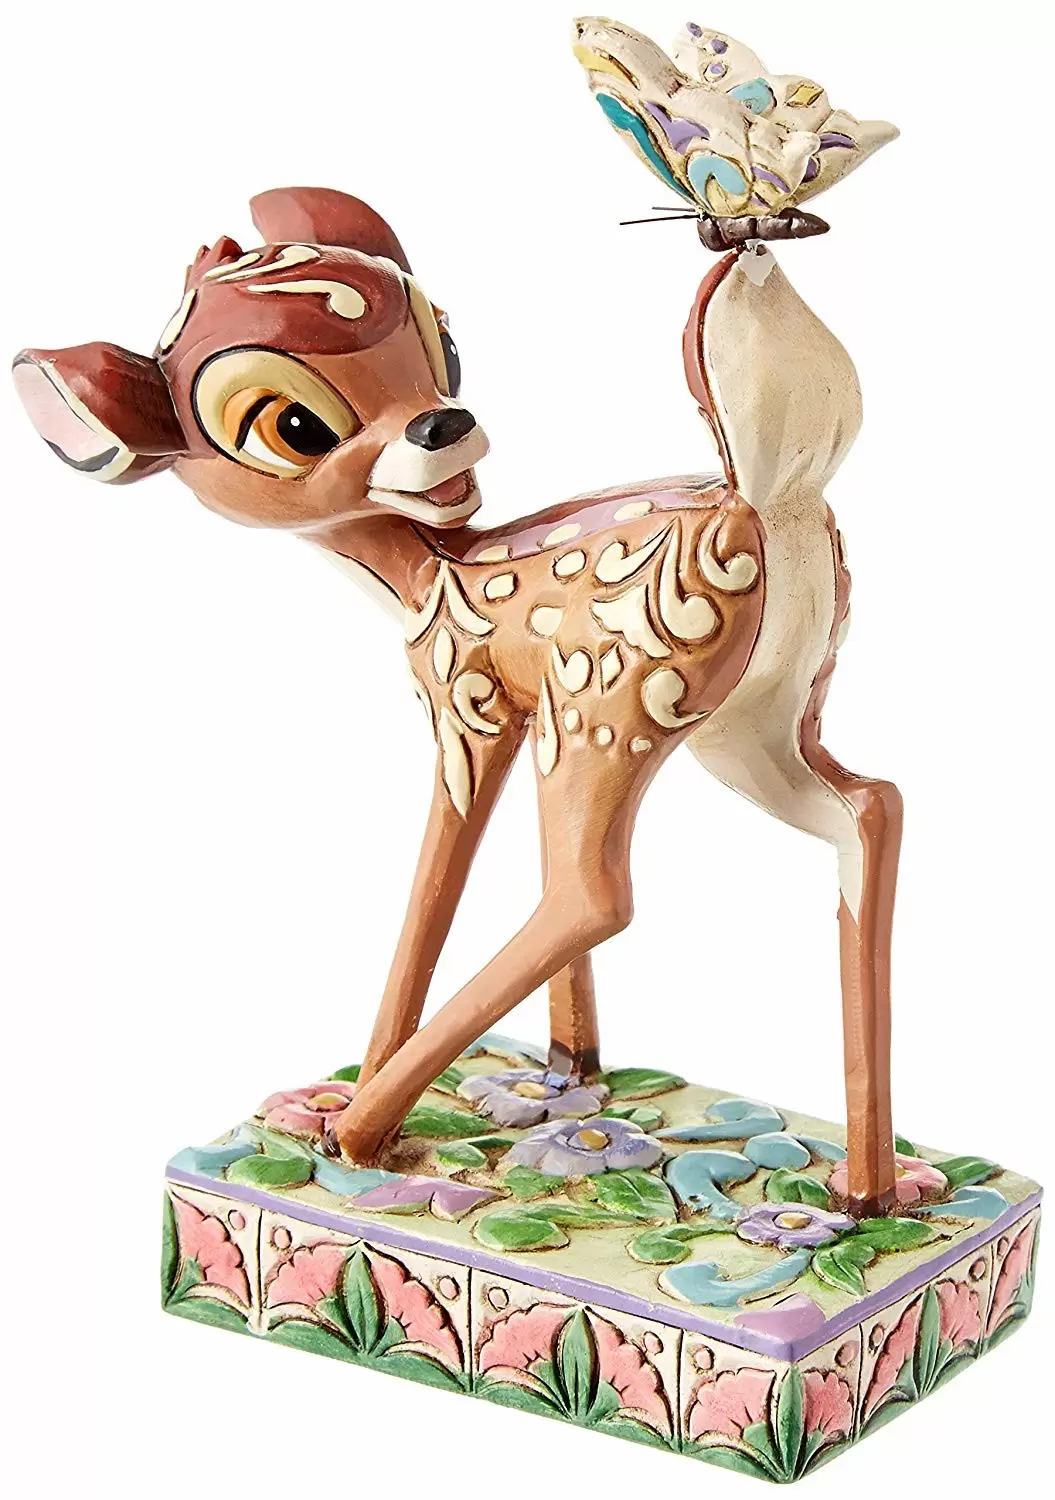 Disney Traditions by Jim Shore - Bambi - Wonder of spring